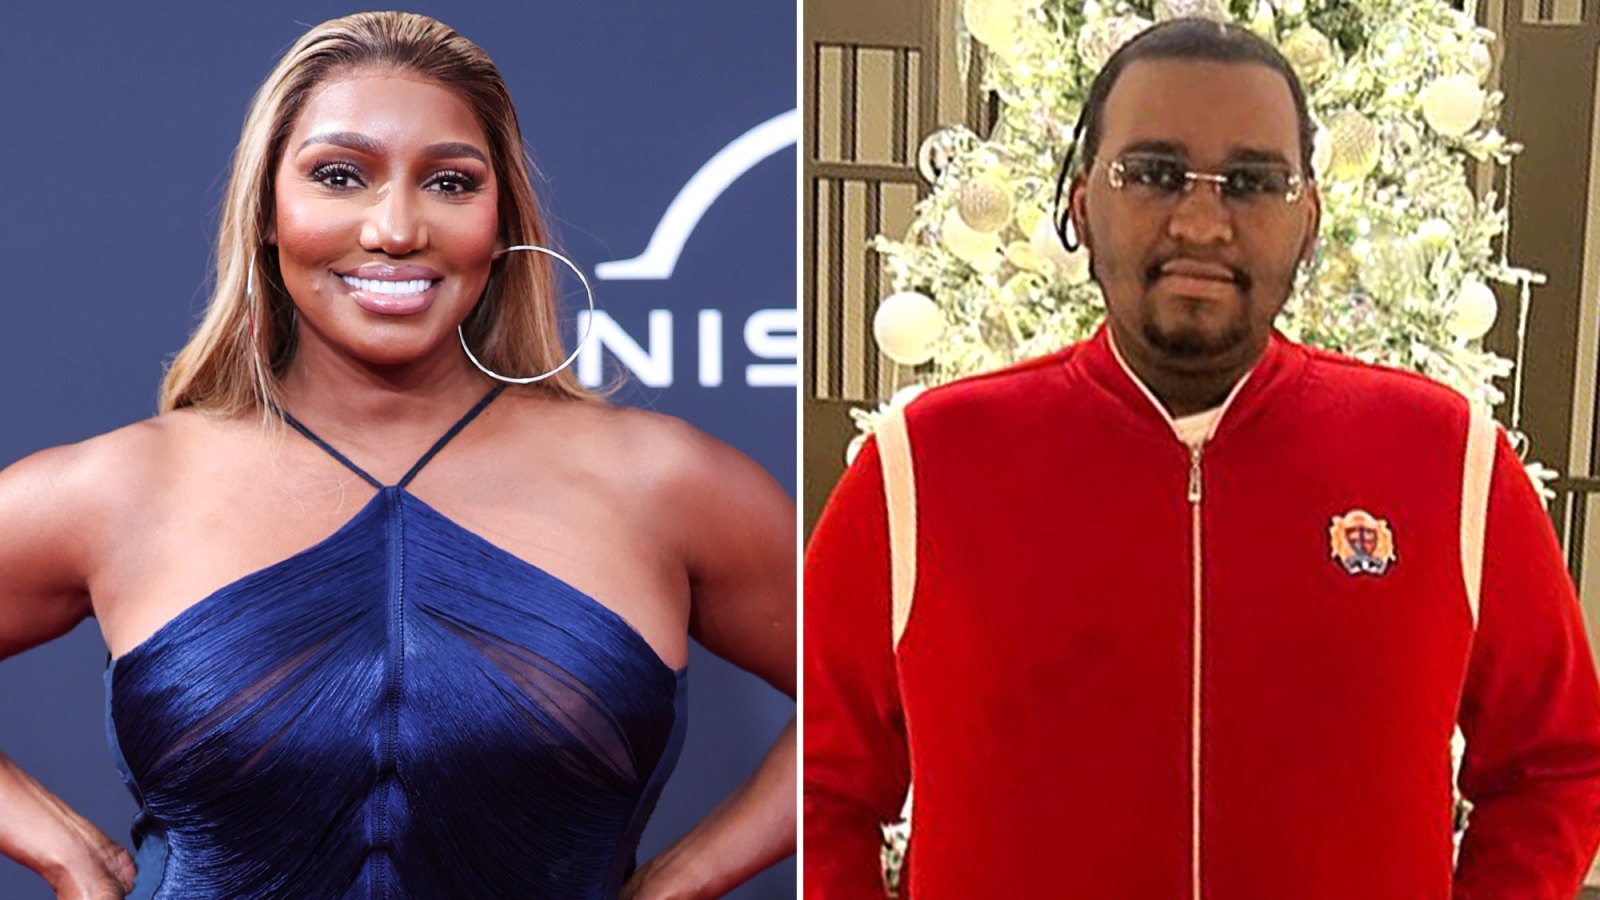 NeNe Leakes’ Son Brentt Leaves Hospital 2 Months After Suffering Stroke: 'Home Just in Time for the Holidays'